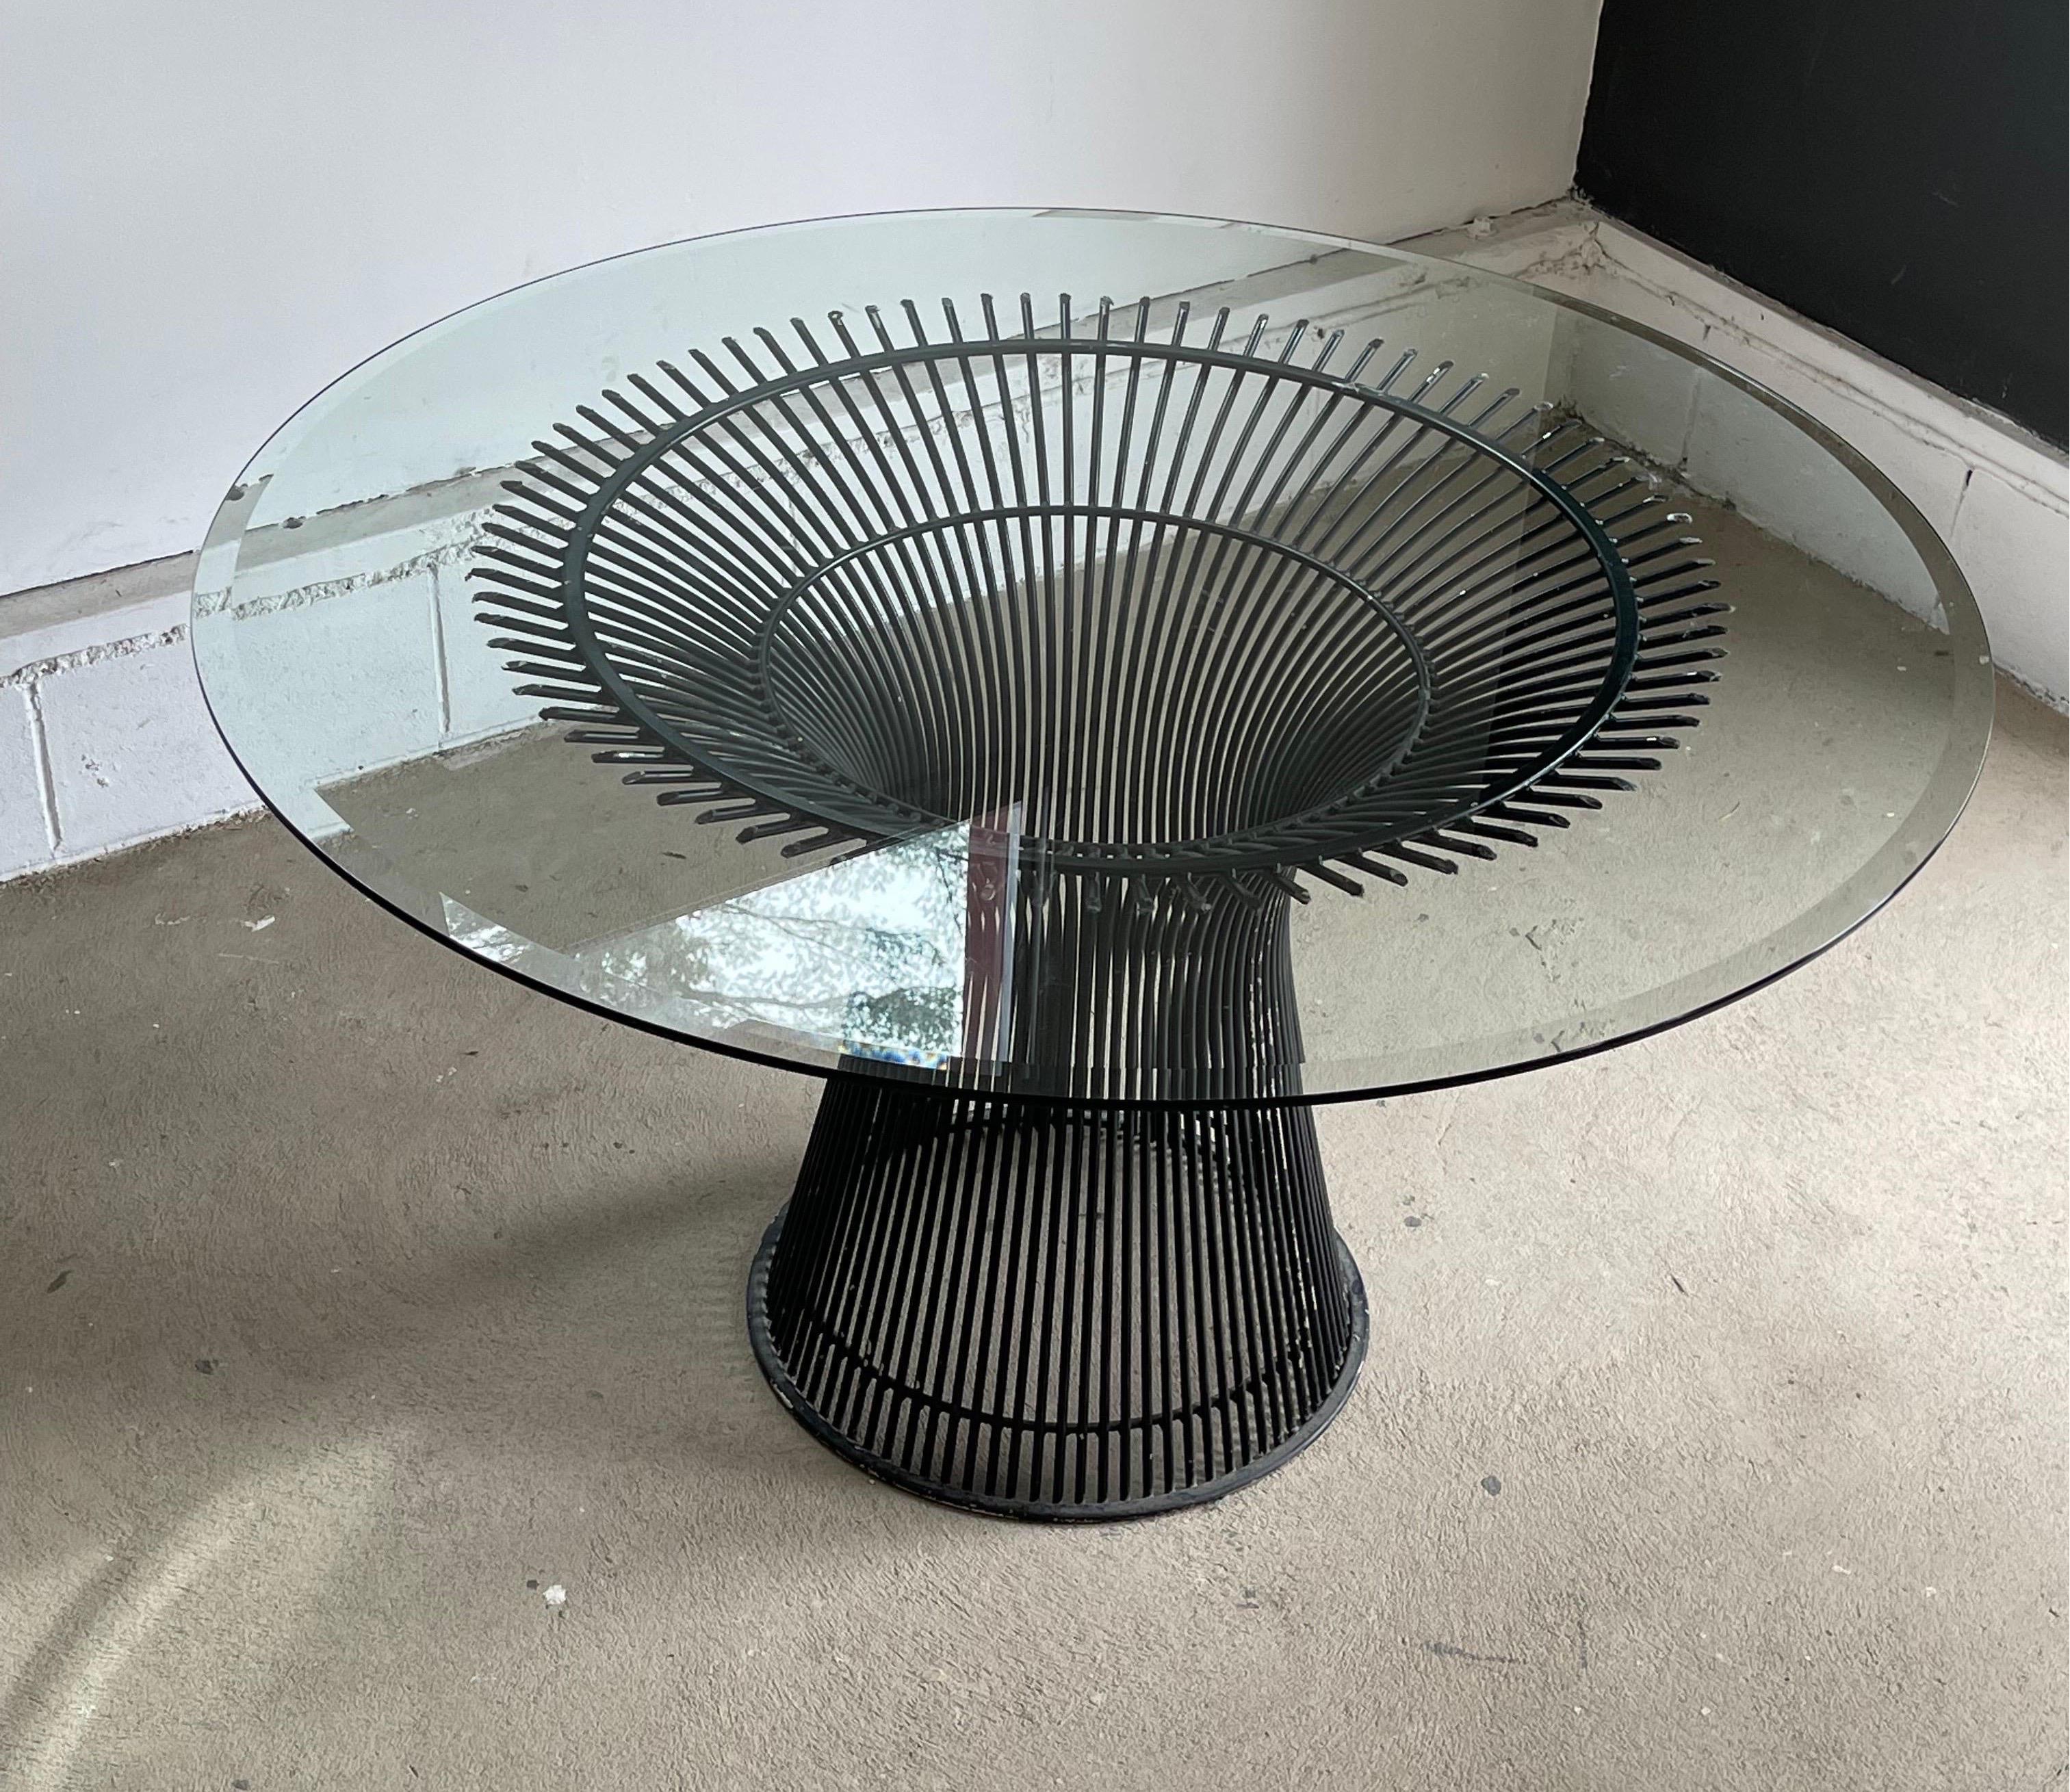 Beautiful Mid-Century Modern glass top on Steel base dining table by Warren Platner for Knoll, circa 1980s. Features a 53” thick glass top and base made of curved rods. This modern dining table can seat up to six and is in good vintage condition